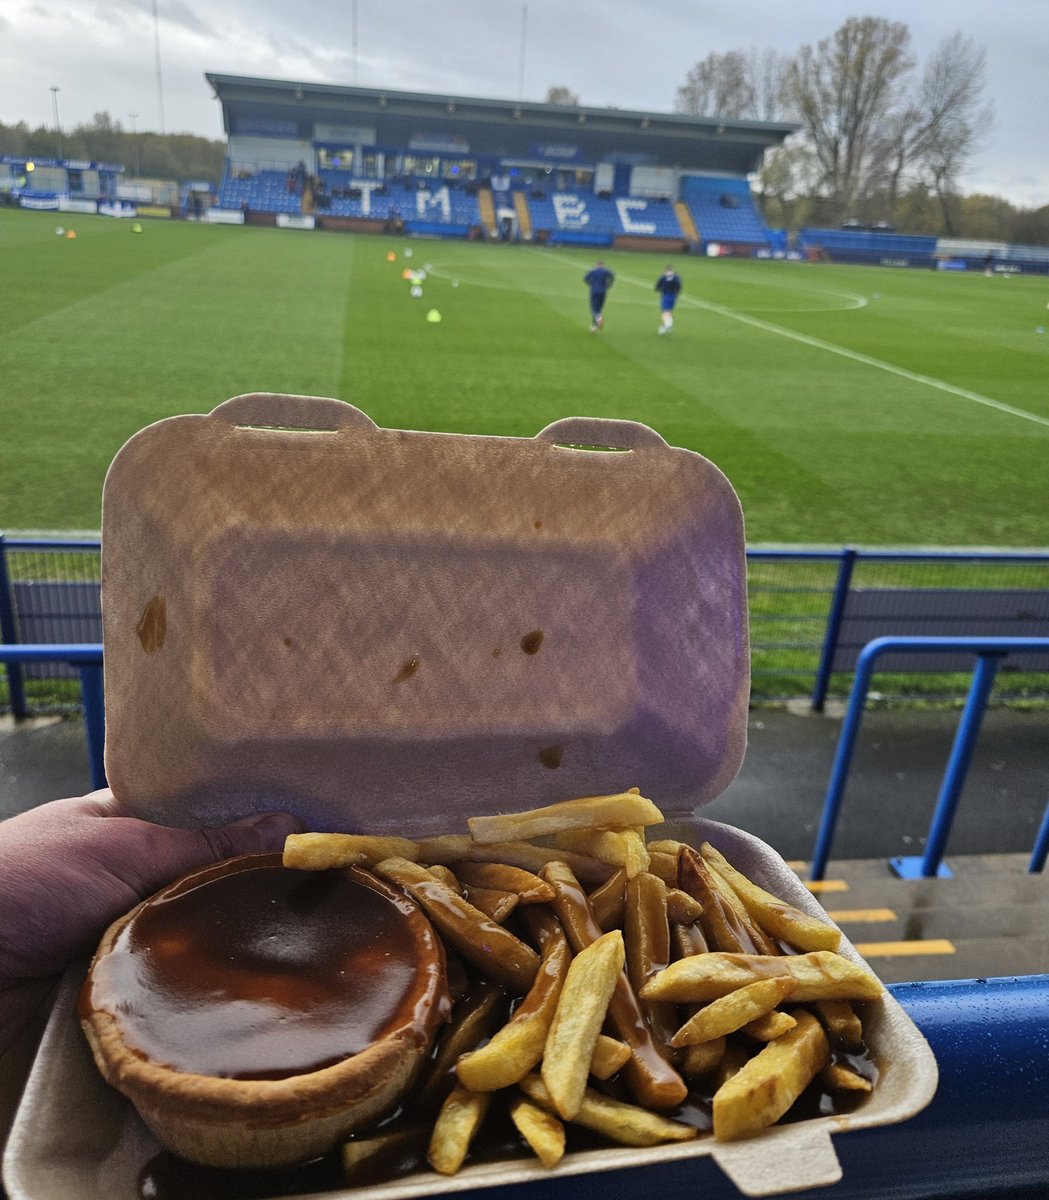 📍 Tameside Stadium @CurzonAshton vs @Matlock_TownFC in the FA Trophy. Pie, chips and gravy at £4.60 for today's @FootyScran👏 missing some peas, and it would have been 10/10!